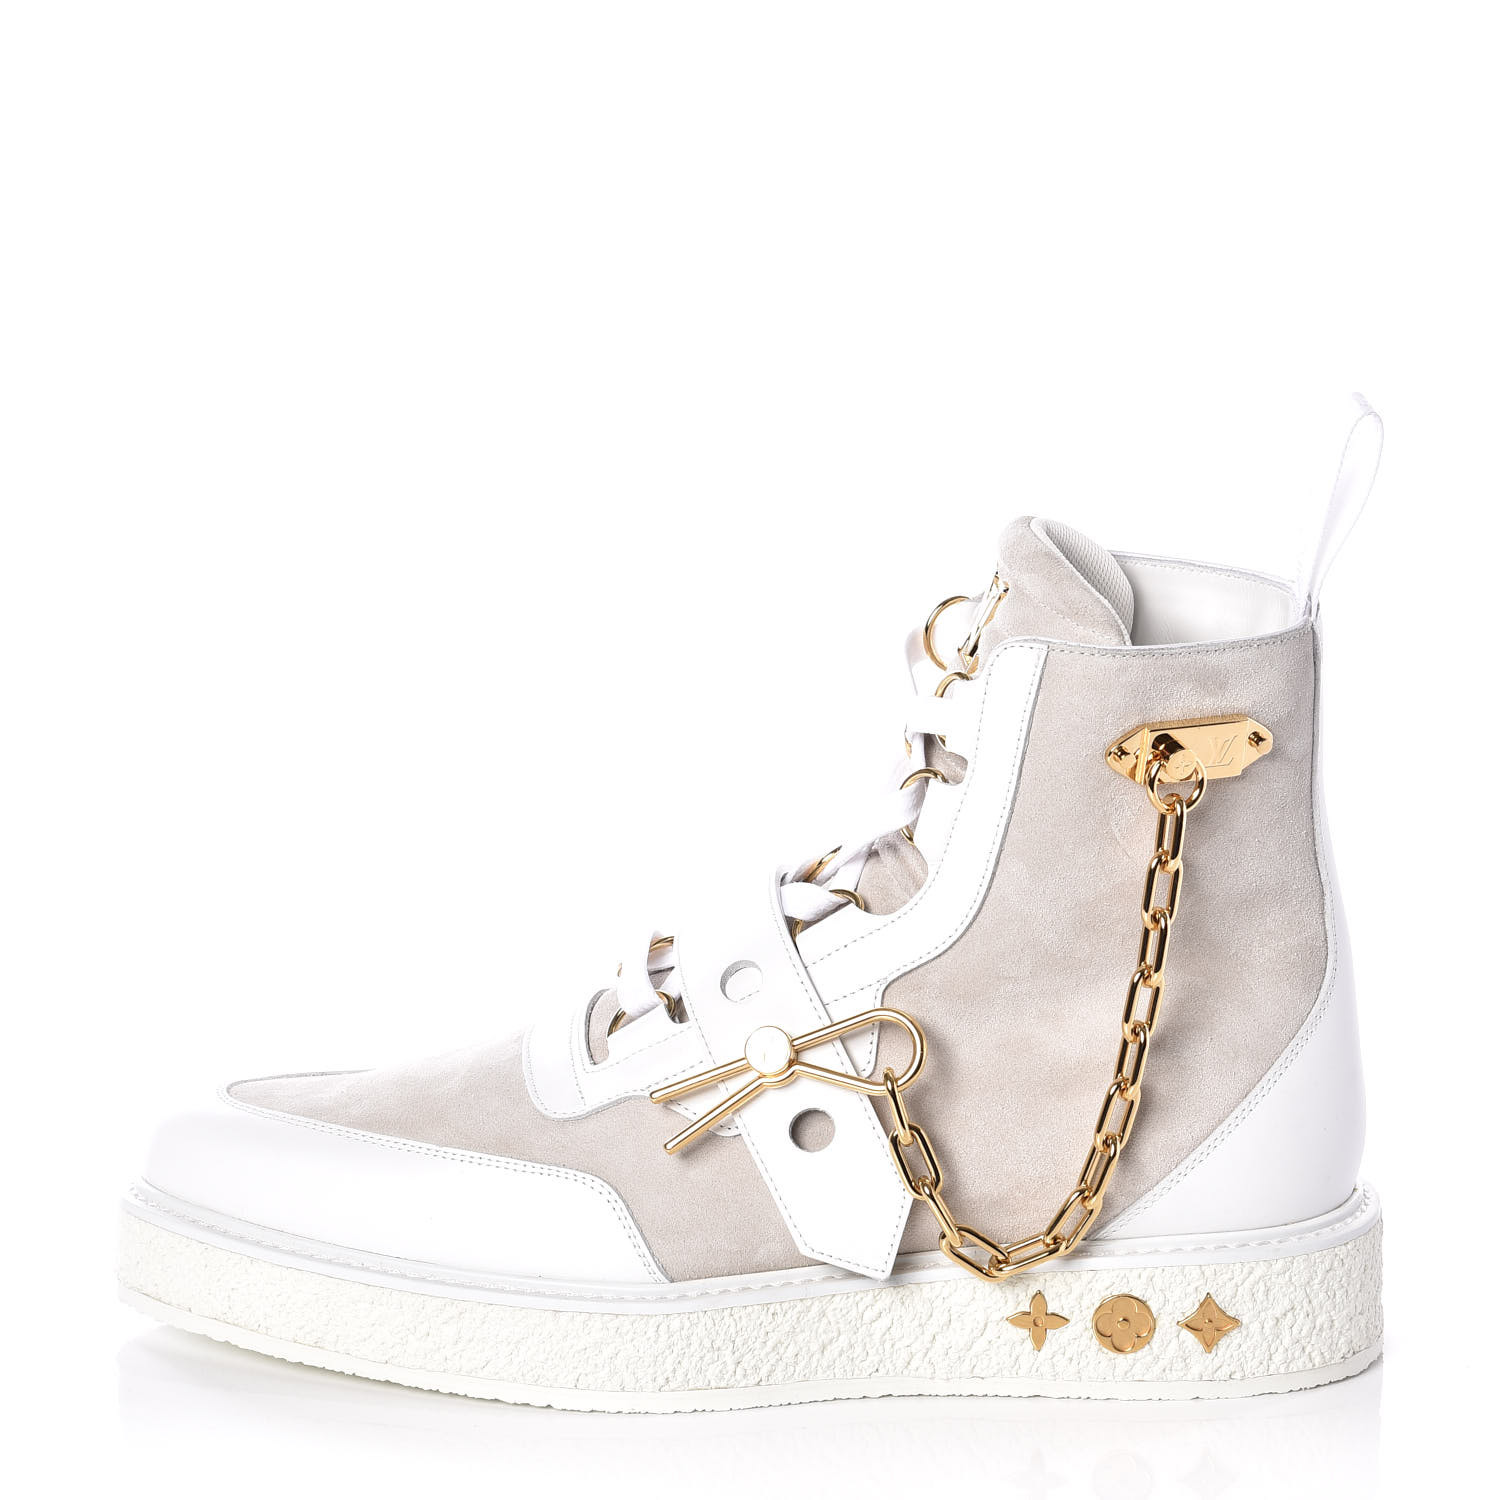 louis vuitton creeper ankle boot